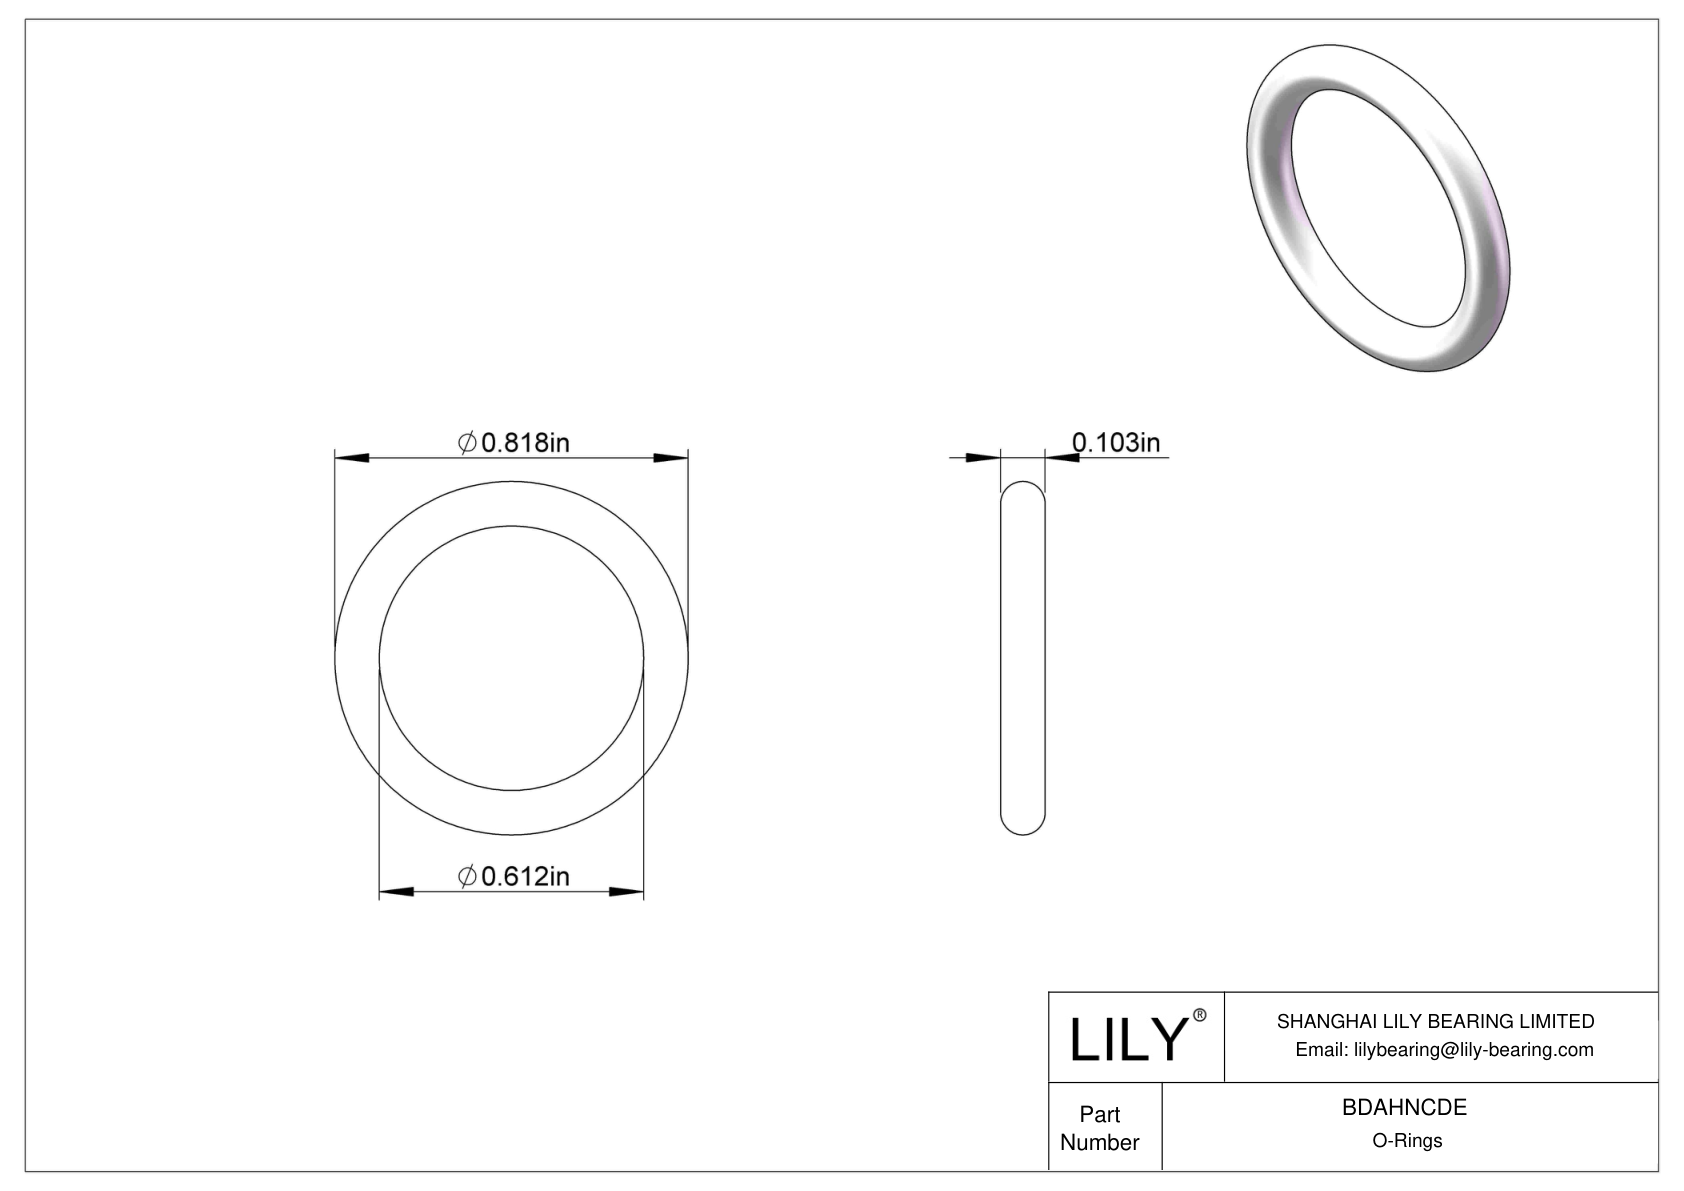 BDAHNCDE Oil Resistant O-Rings Round cad drawing